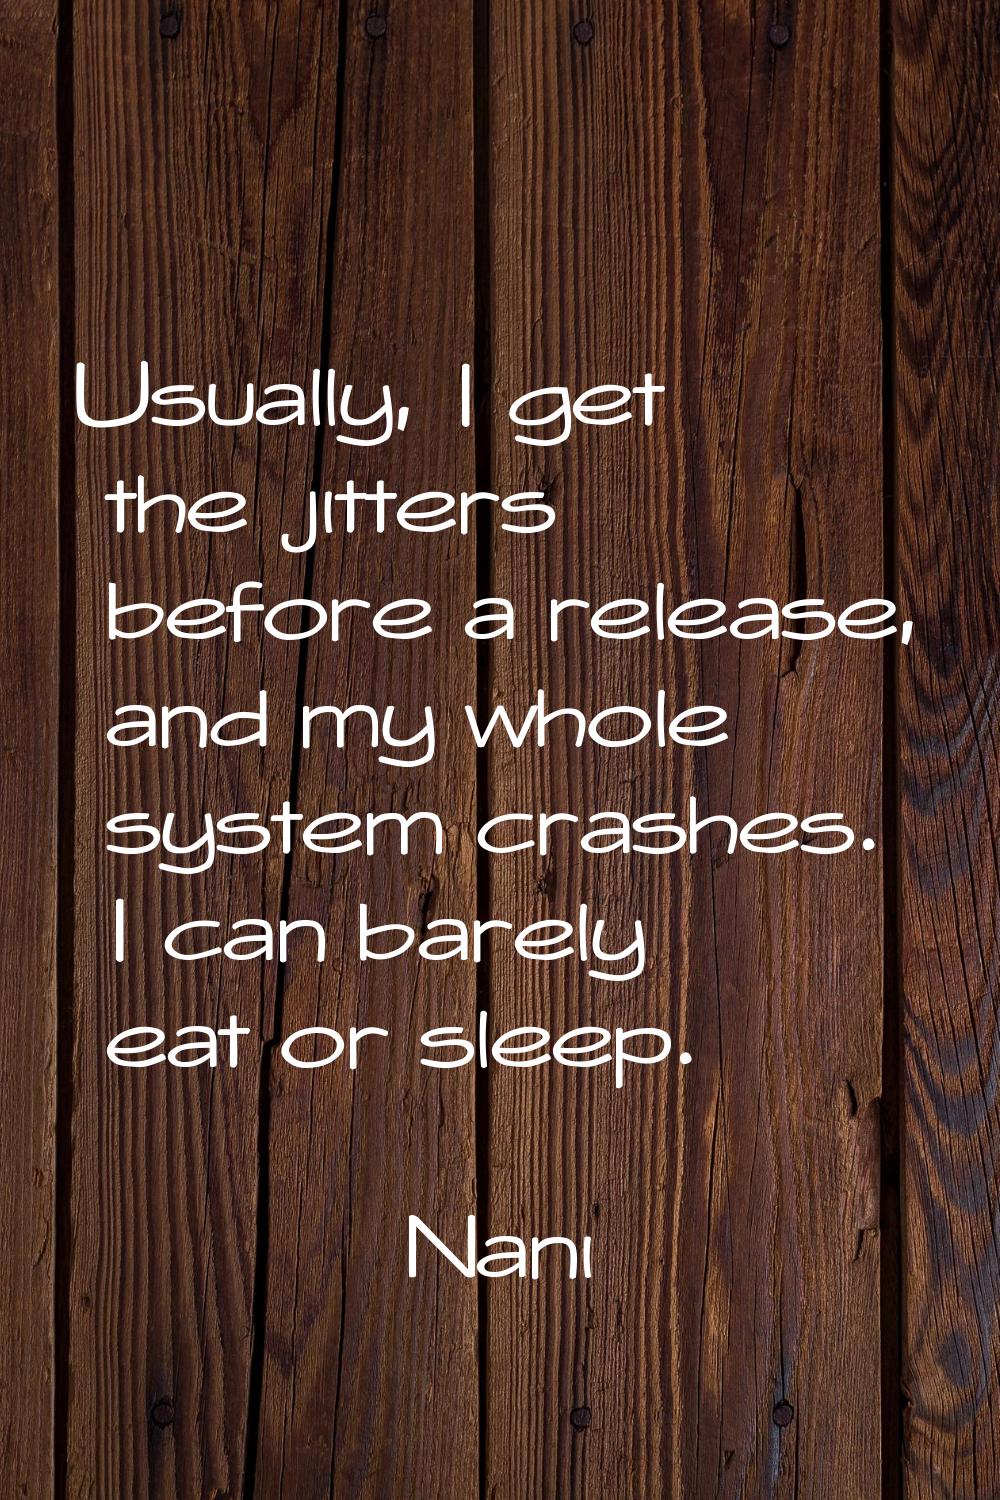 Usually, I get the jitters before a release, and my whole system crashes. I can barely eat or sleep